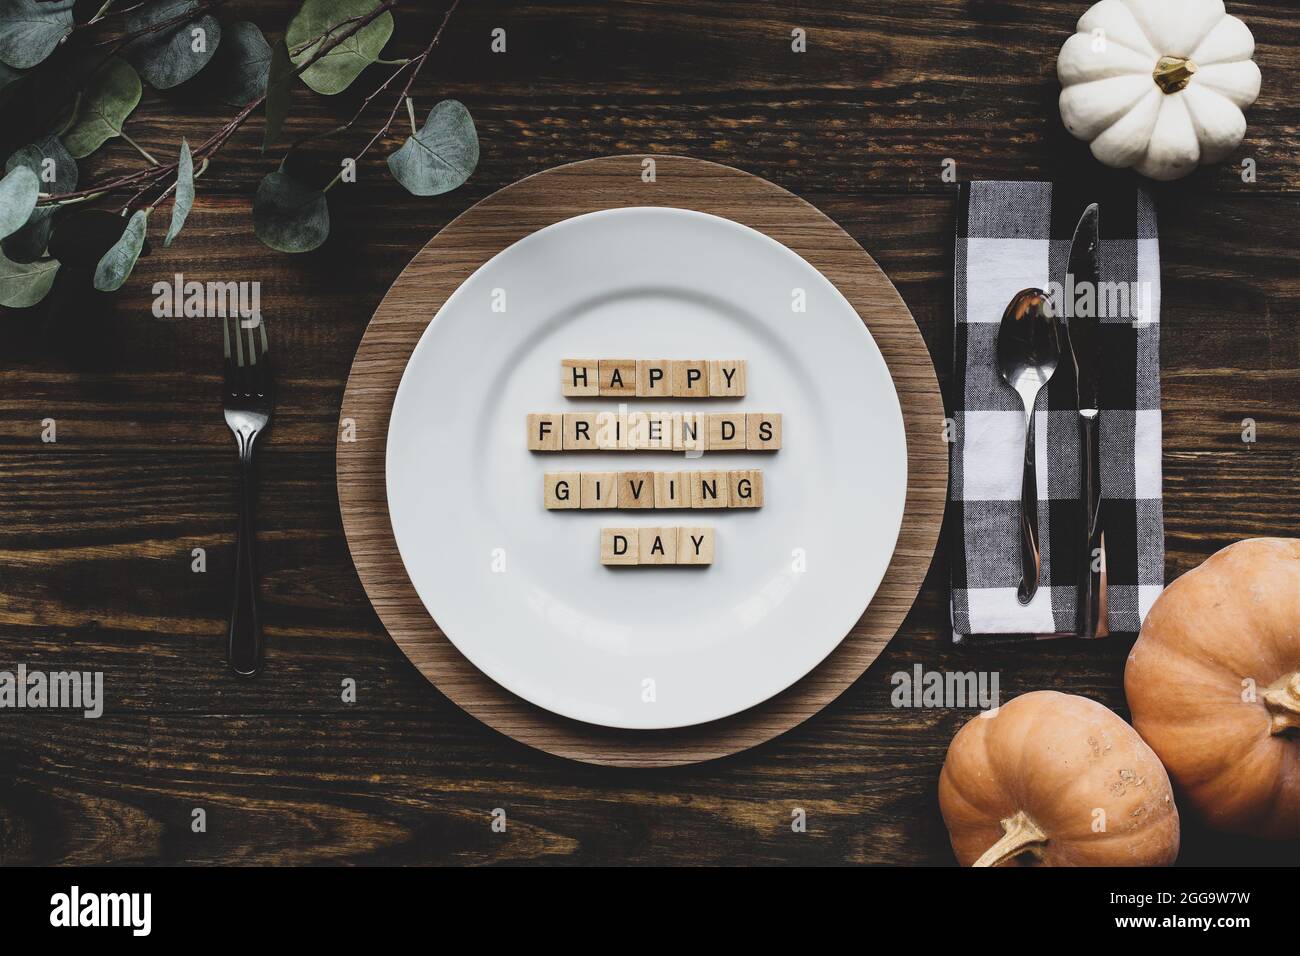 Thanksgiving place setting with plate, napkin, on a  decorated table from flat lay or top view. Happy Friendsgiving Day spelled out with wood blocks. Stock Photo